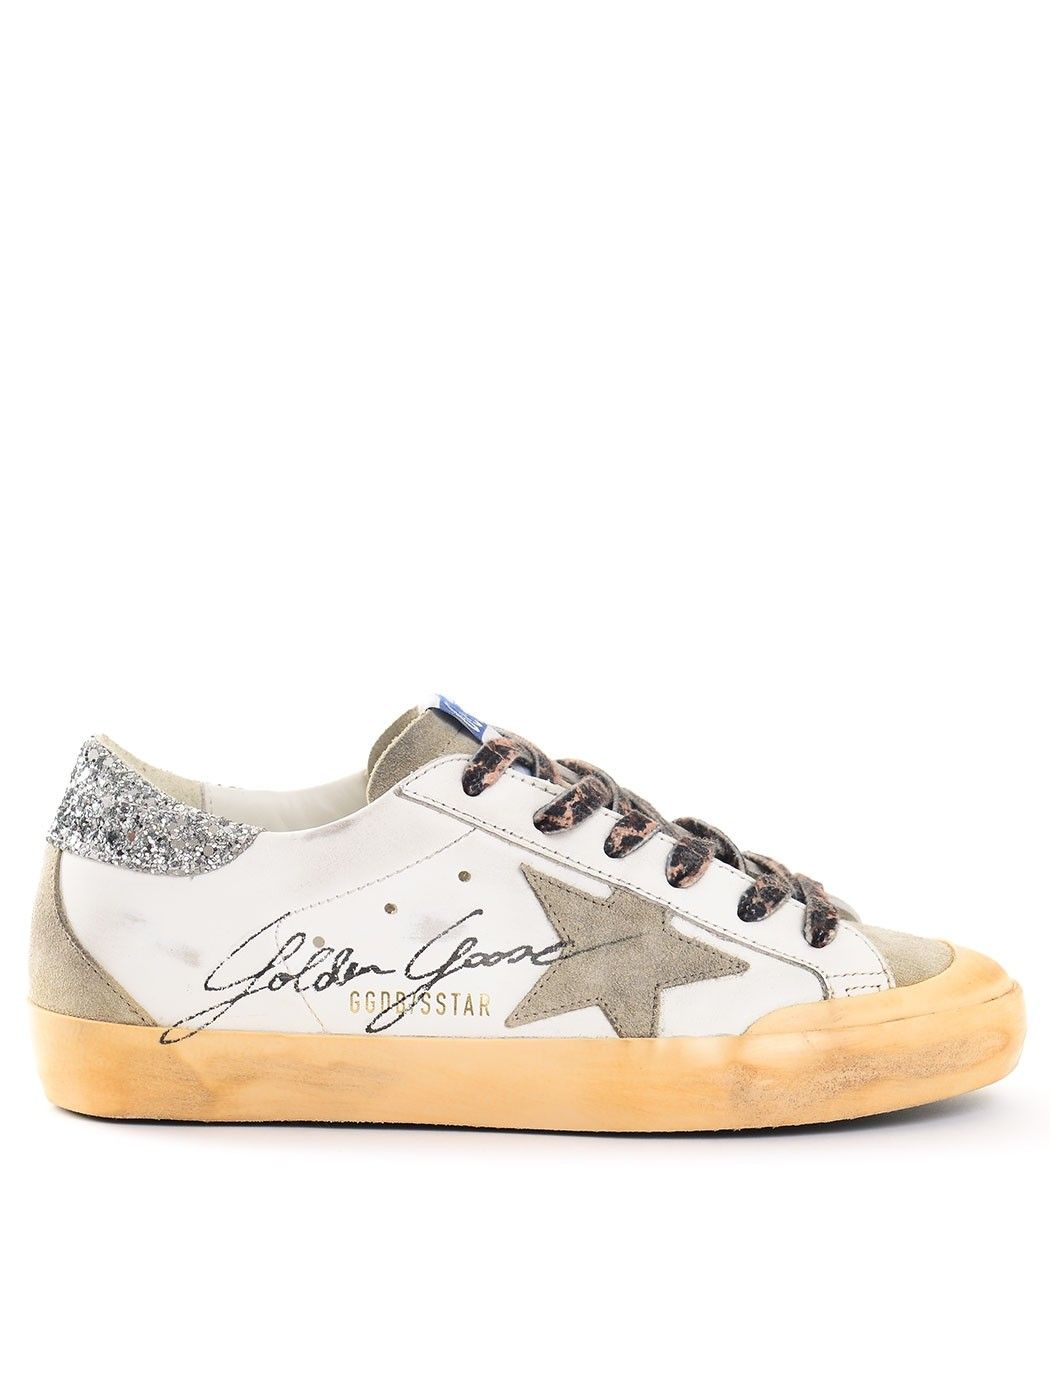  WOMAN SHOES,GIVENCHY SHOES,GOLDEN GOOSE SHOES,MARNI SHOES  GOLDEN GOOSE GWF00175